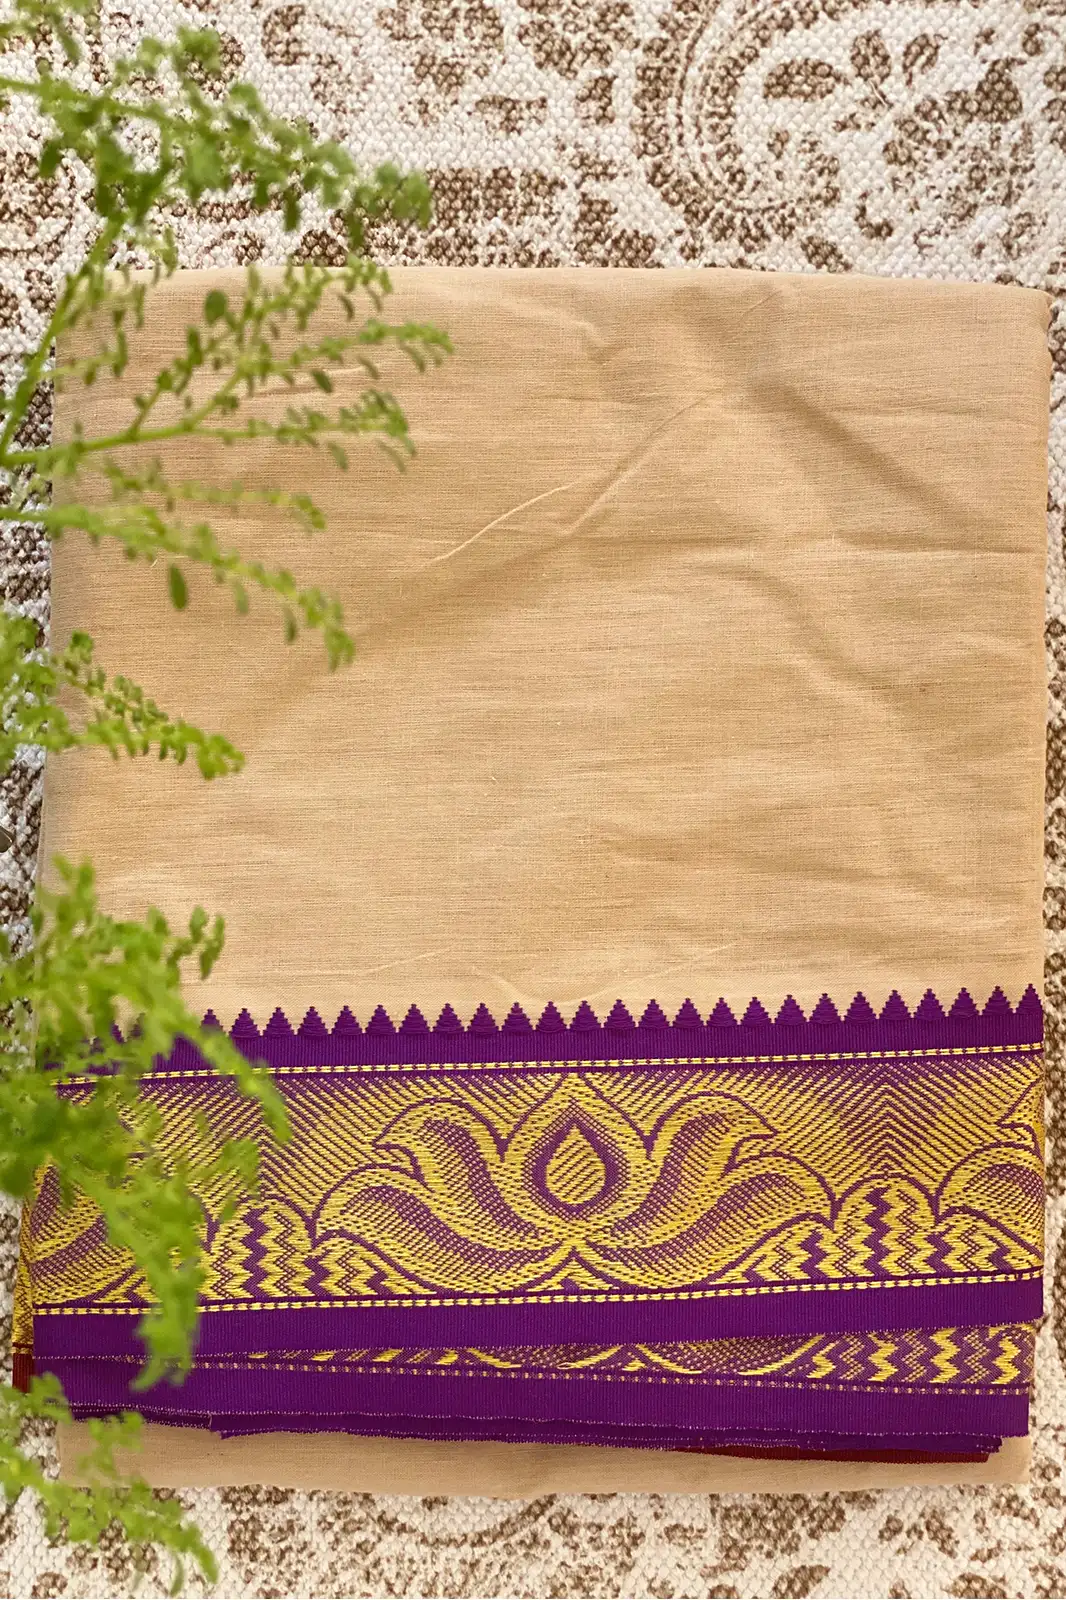 sodoai natural cotton dhoti, dhoti indian clothing, best cotton dhoti, white cotton print dhoti, dhoti traditional, eco-friendly clothing store, cotton dhoti, white cotton dhoti online, handwoven dhoti, dhoti wrap, dhoti clothing, cotton dhoti pants, handwoven cotton, cotton dhoti price, handloom cotton dhoti, cotton silk dhoti, best cotton dhoti, cotton white dhoti, pure cotton dhoti price, mens dhoti kurta set, handloom cotton dhoti price, printed dhoti pants, dhoti traditional, organic cotton dhoti, readymade dhoti price, Indian traditional clothes, indian traditional clothes shop, sustainable clothing brand